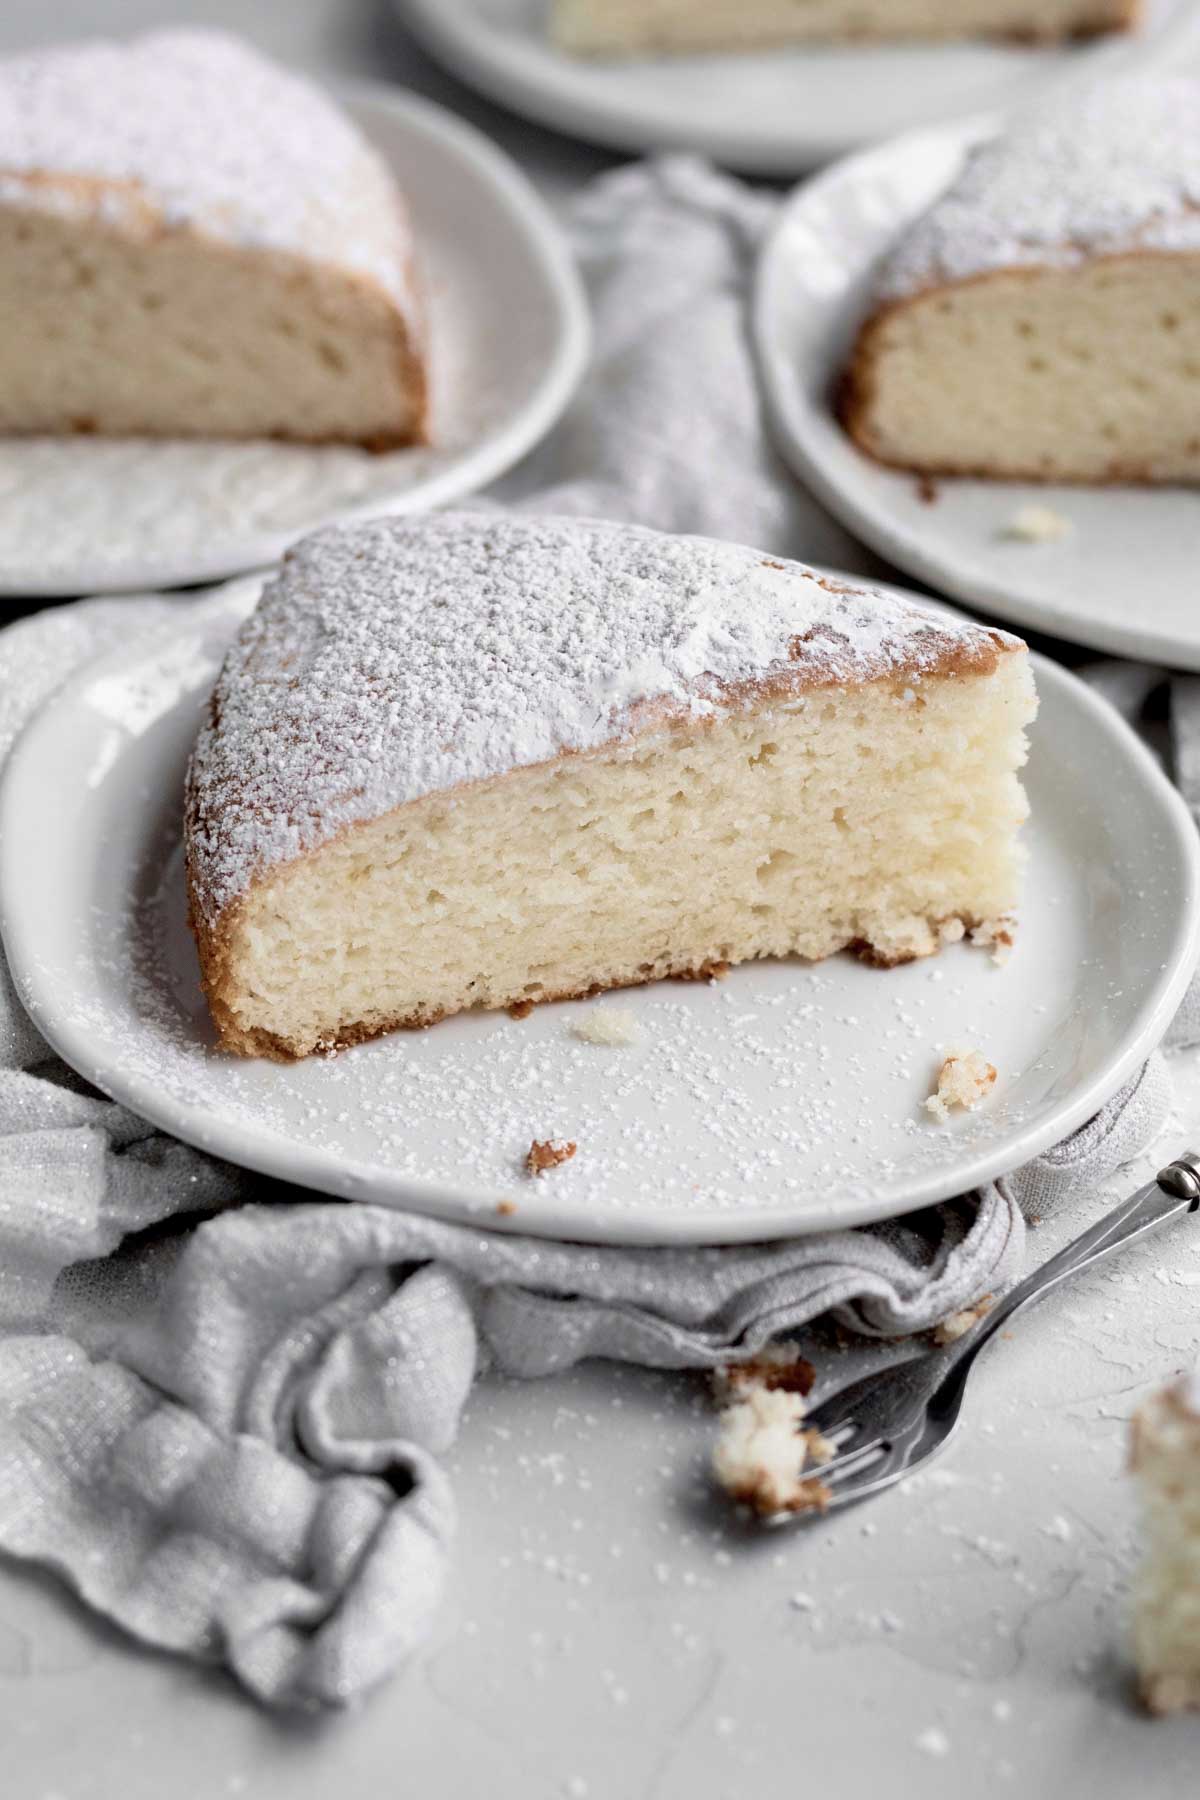 Light and airy, this Irish Tea Cake sits covered in powdered sugar.